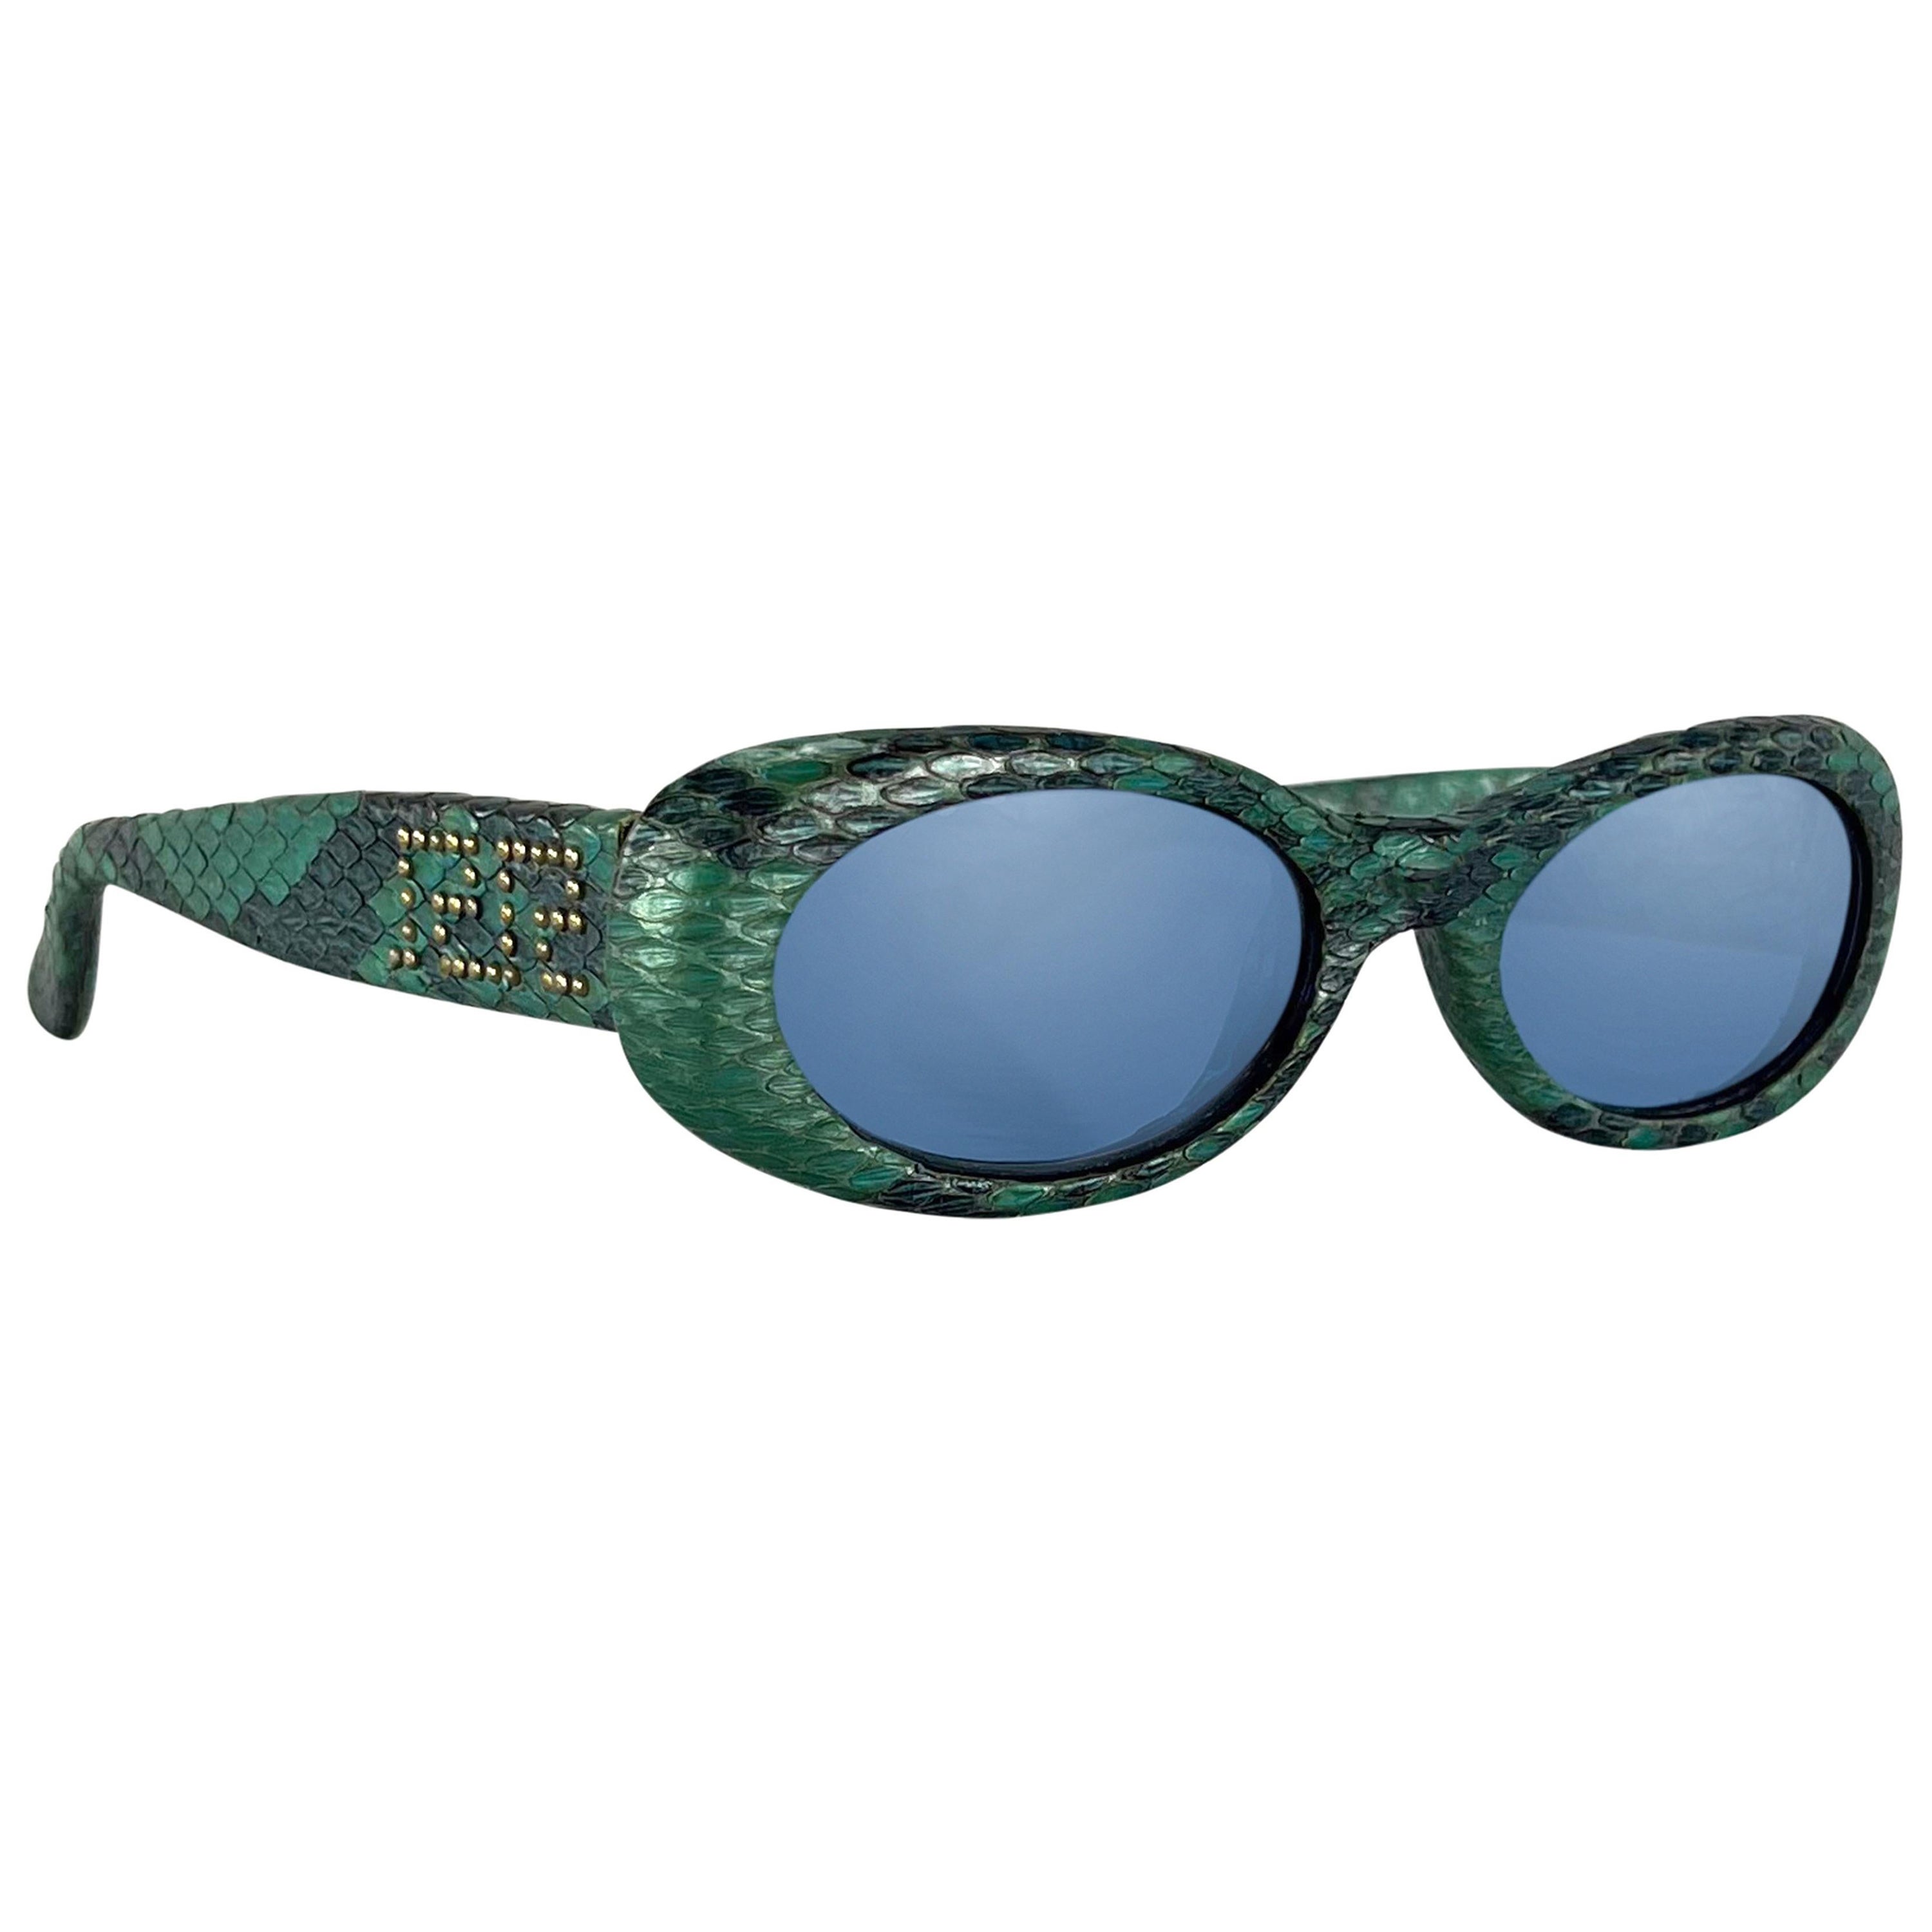 S/S 2000 Gianni Versace by Donatella Blue Genuine Python Oval Sunglasses For Sale